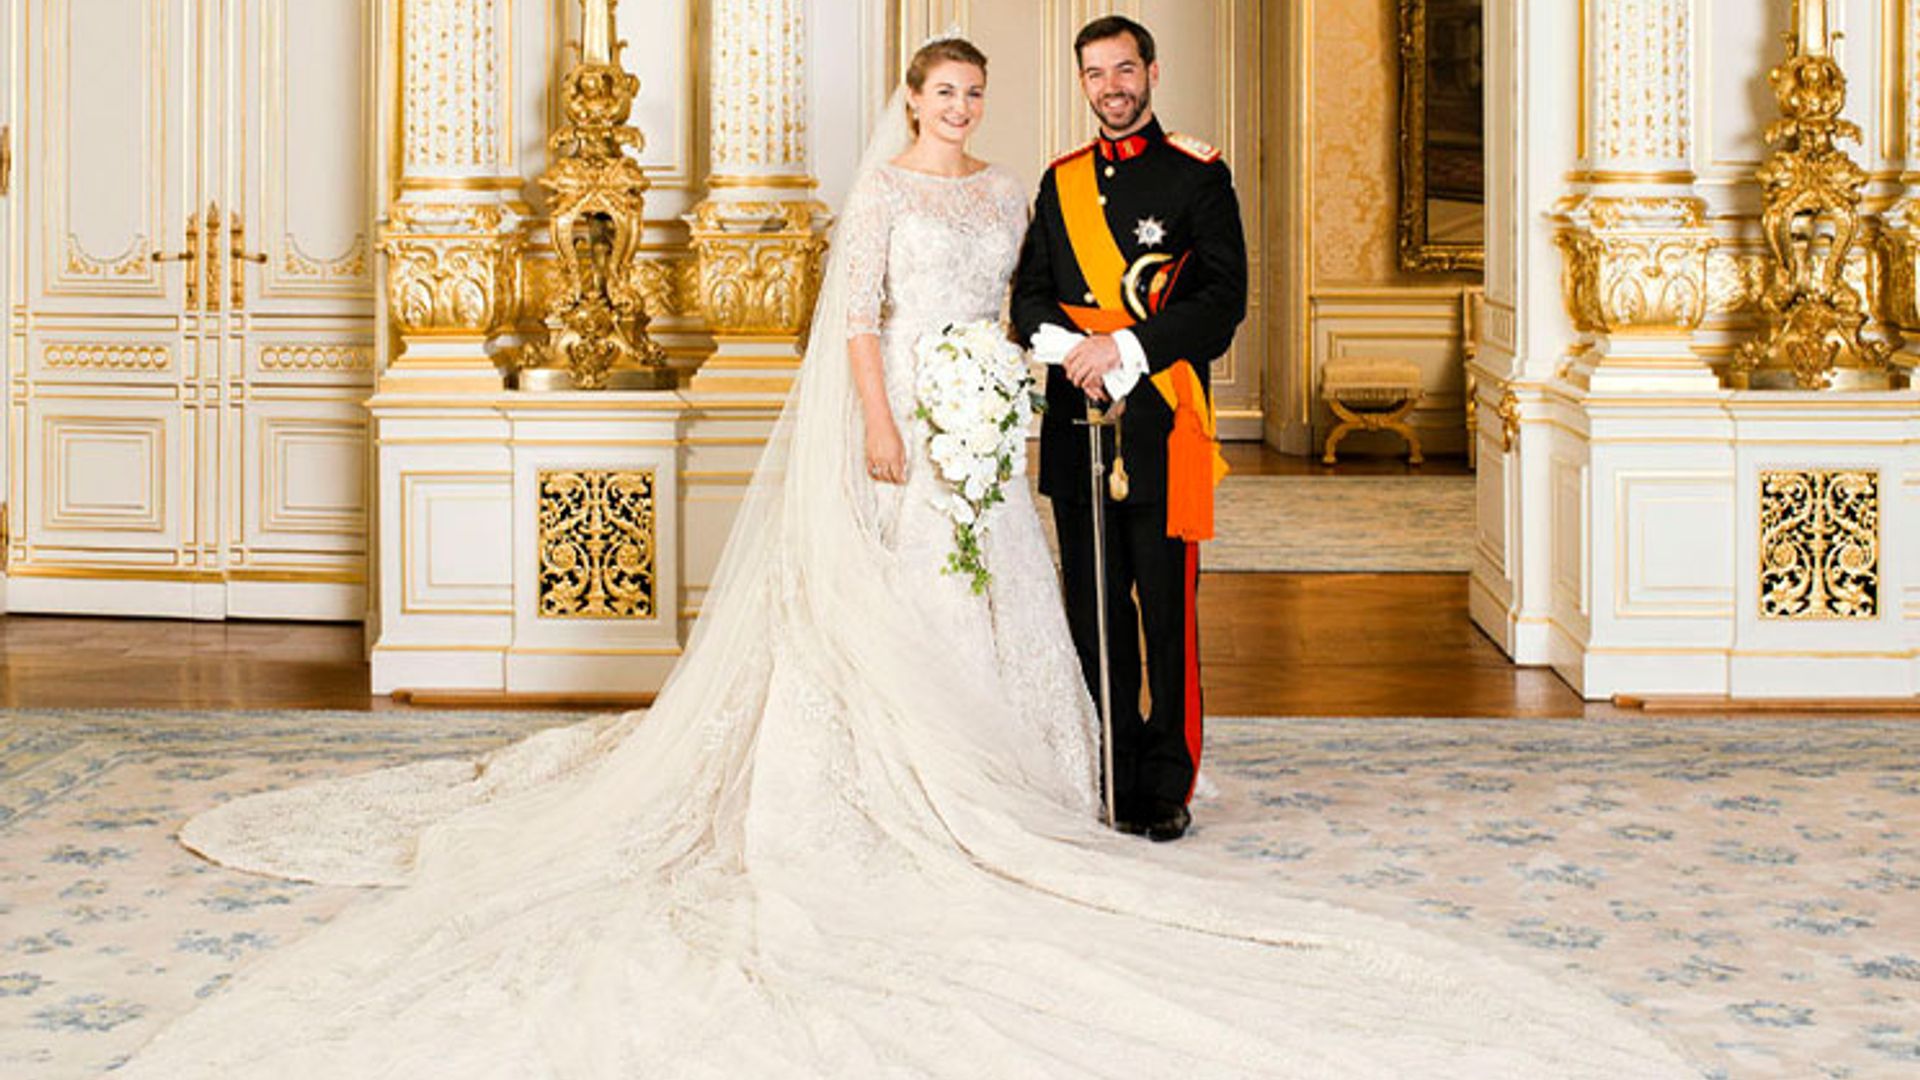 Luxembourg Royal Wedding the latest official photographs of the couple